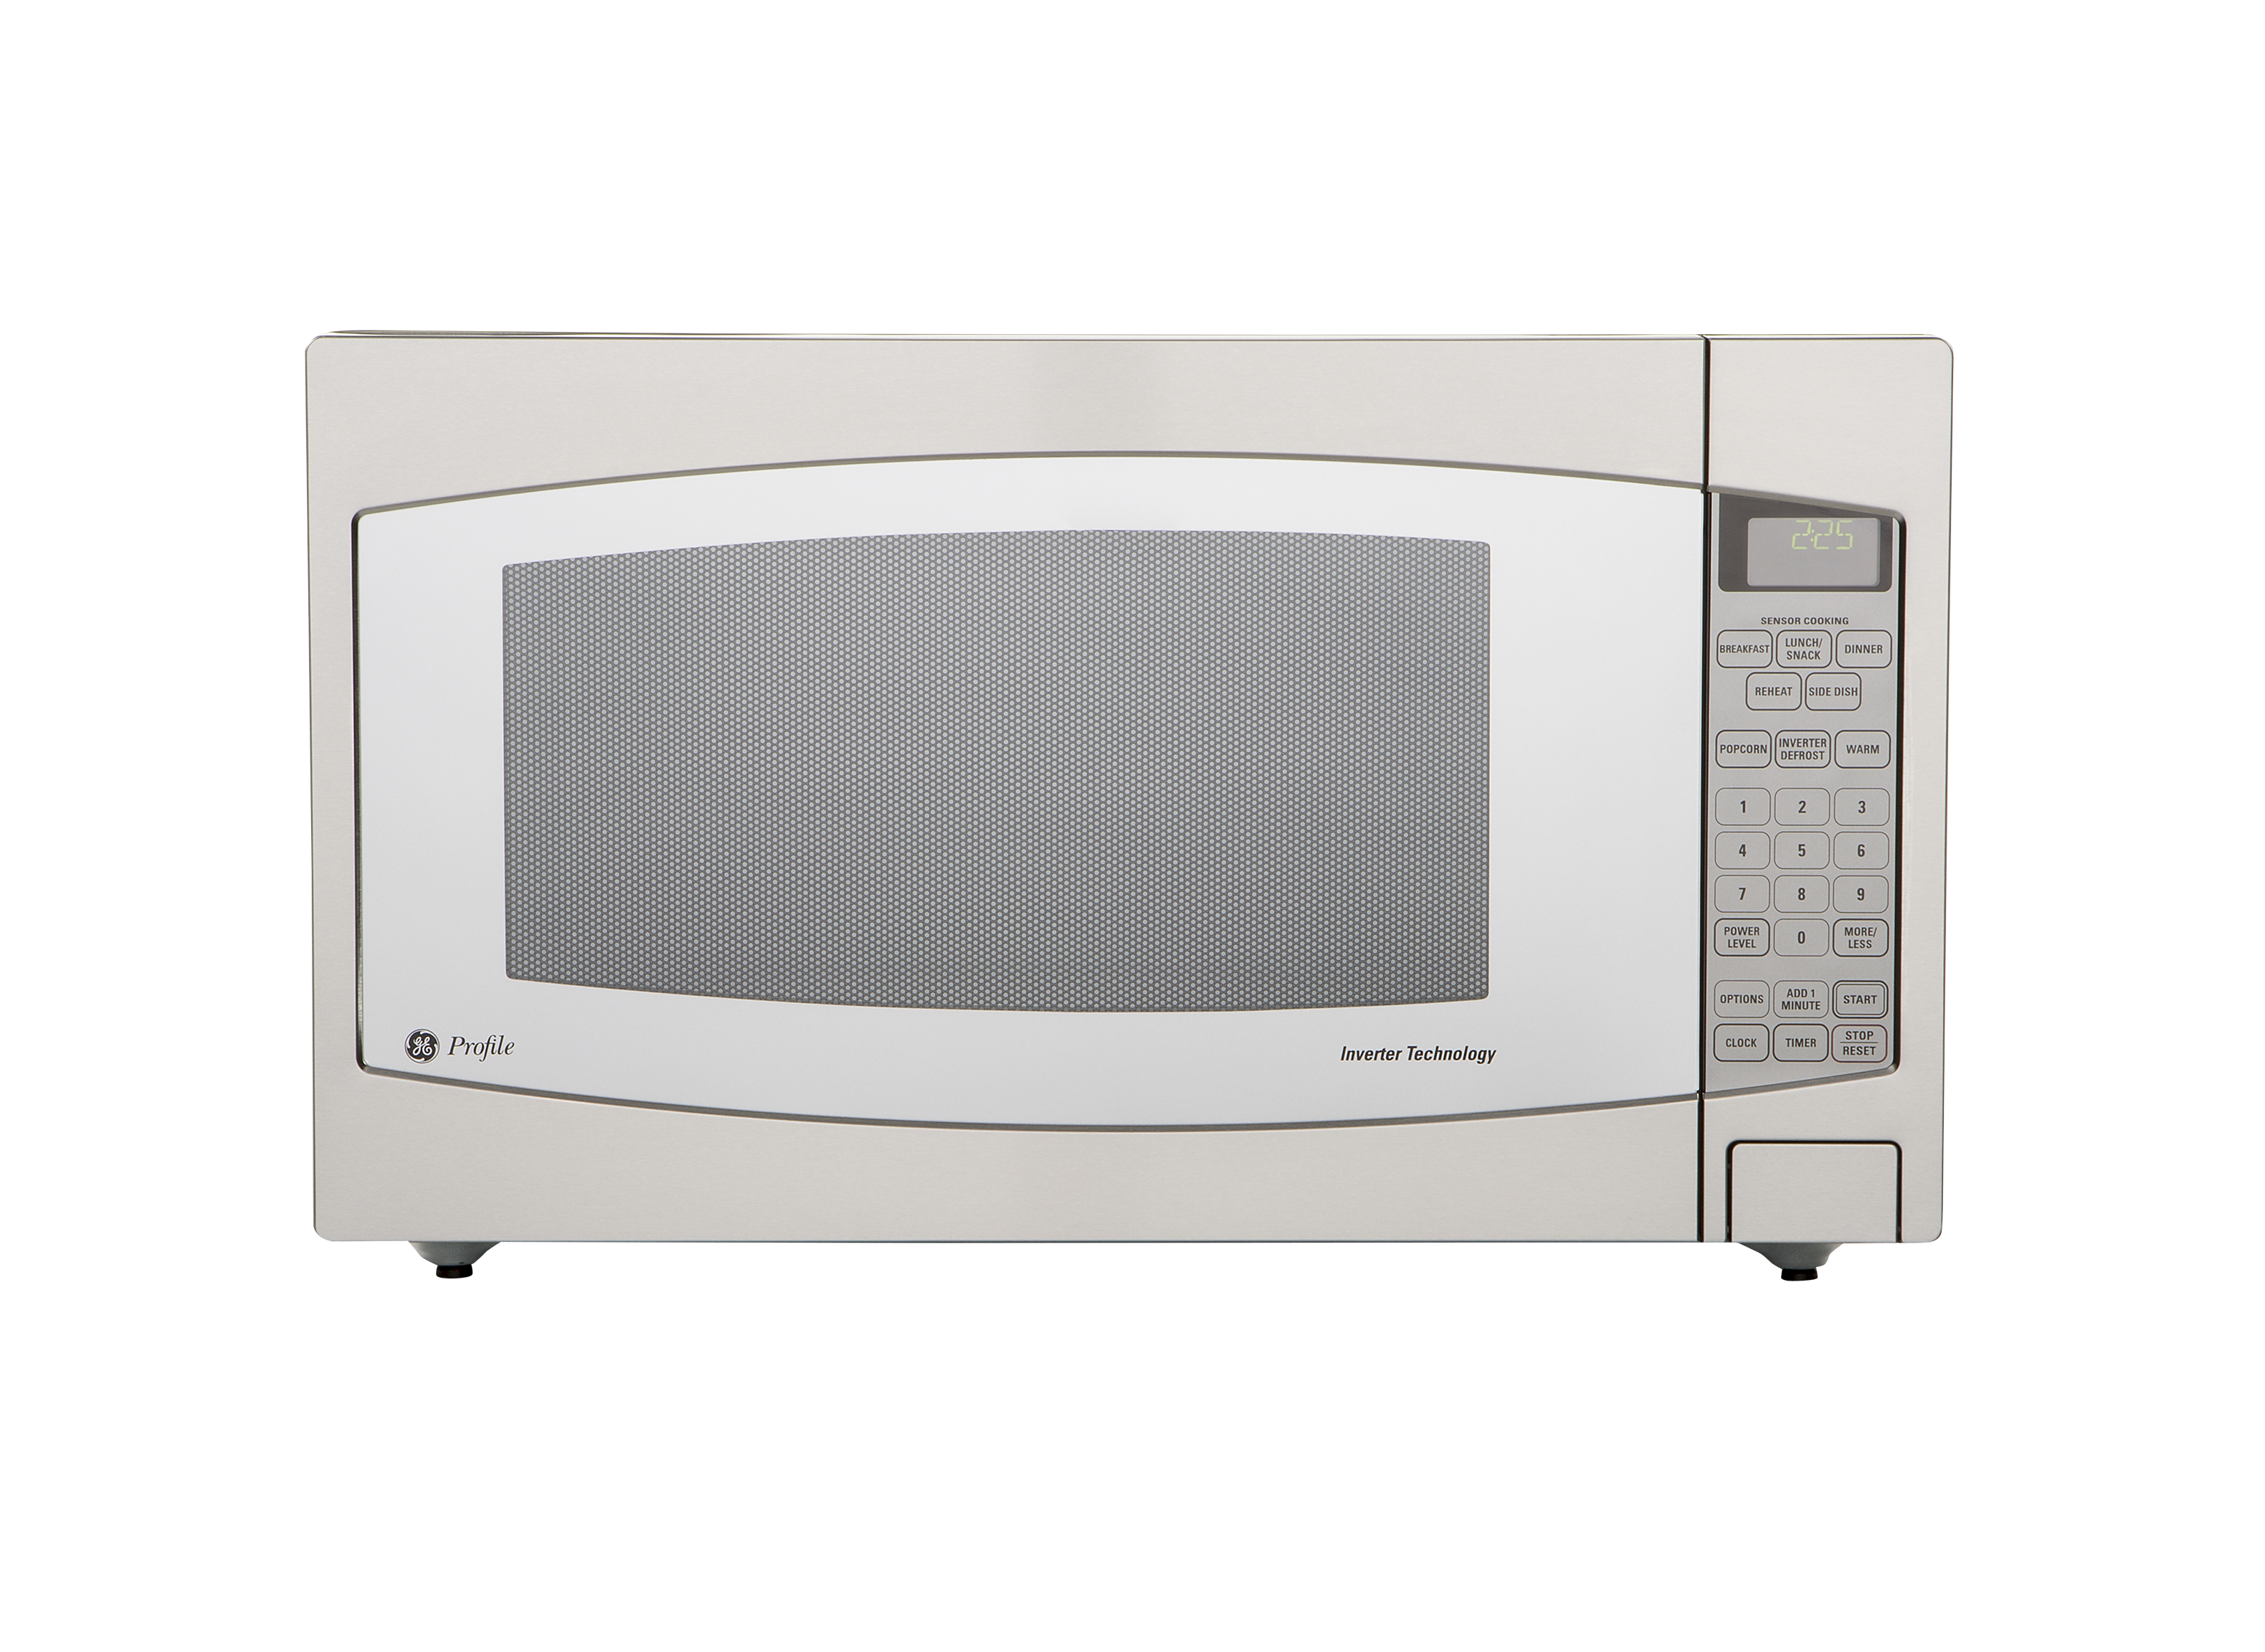 GE Profile Series 2.2 Cu. Ft. Countertop Microwave Oven review